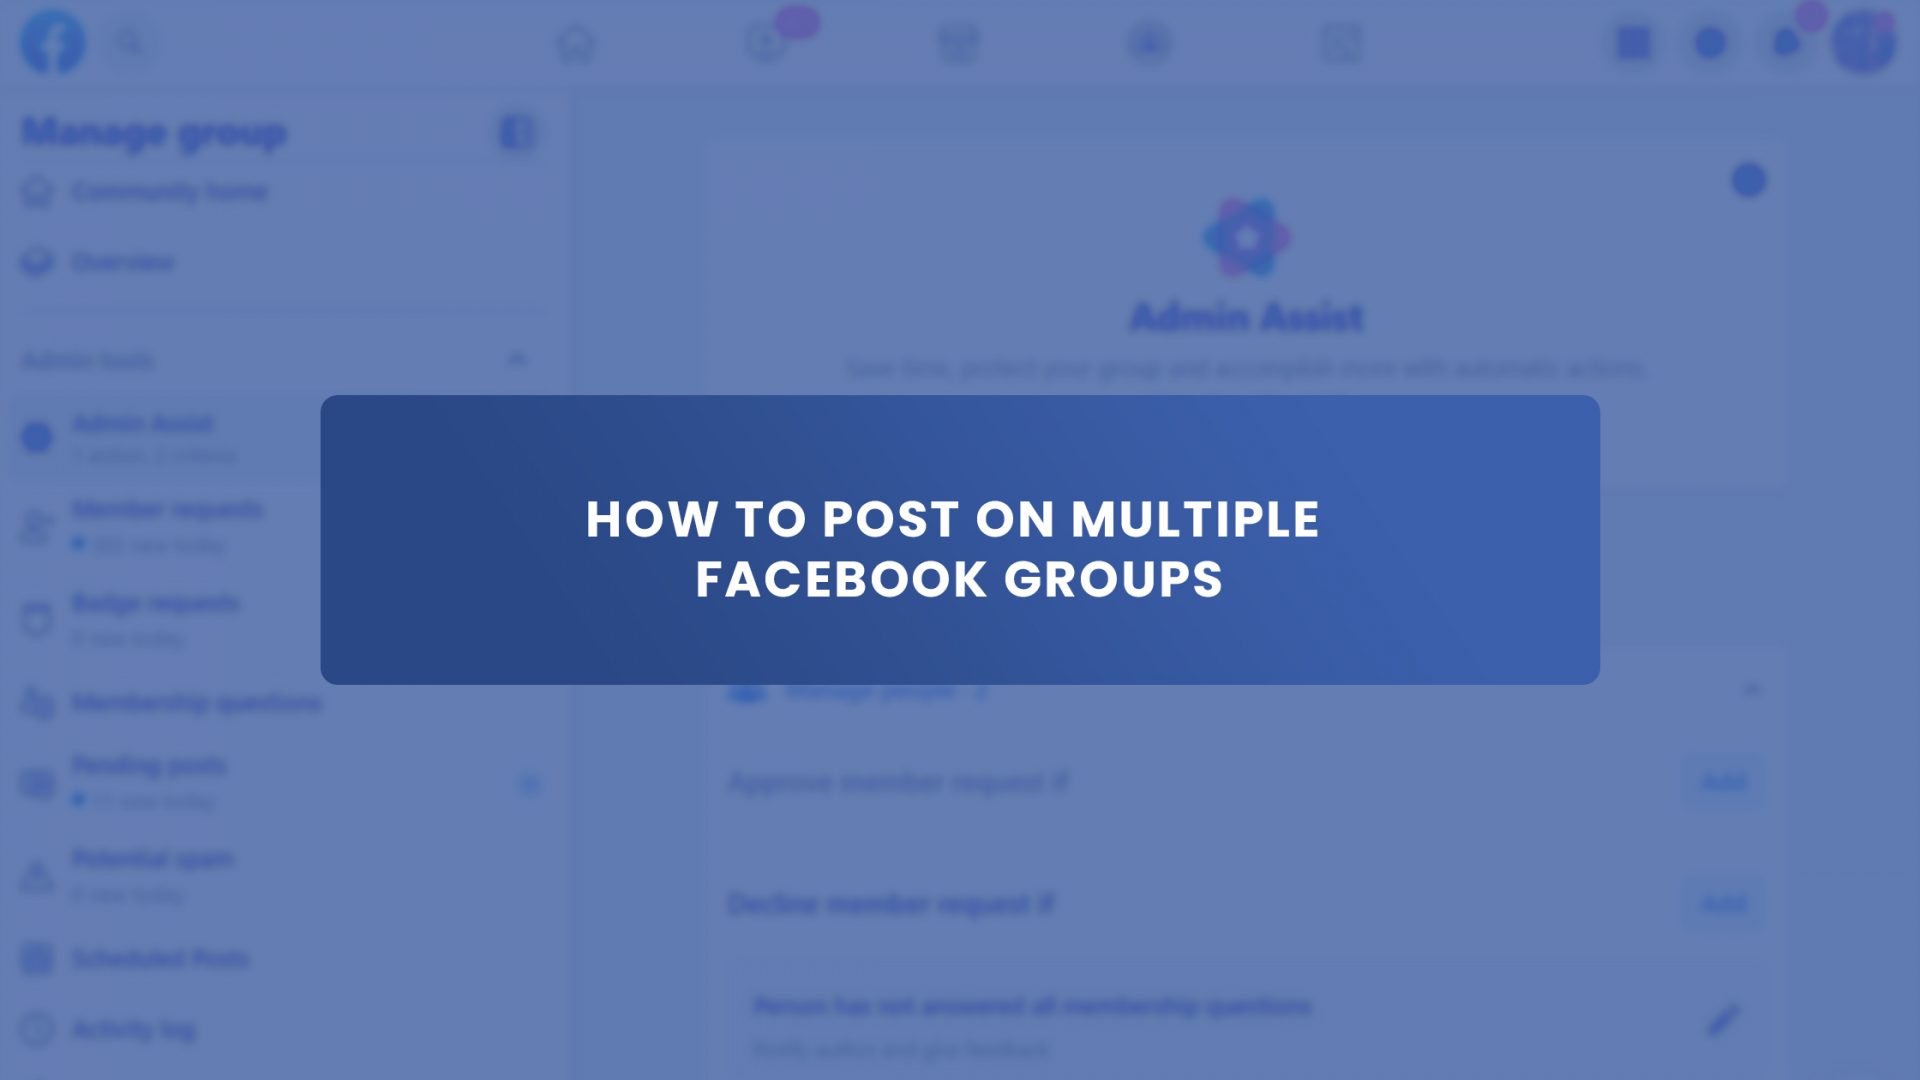 How to Post on Multiple Facebook Groups